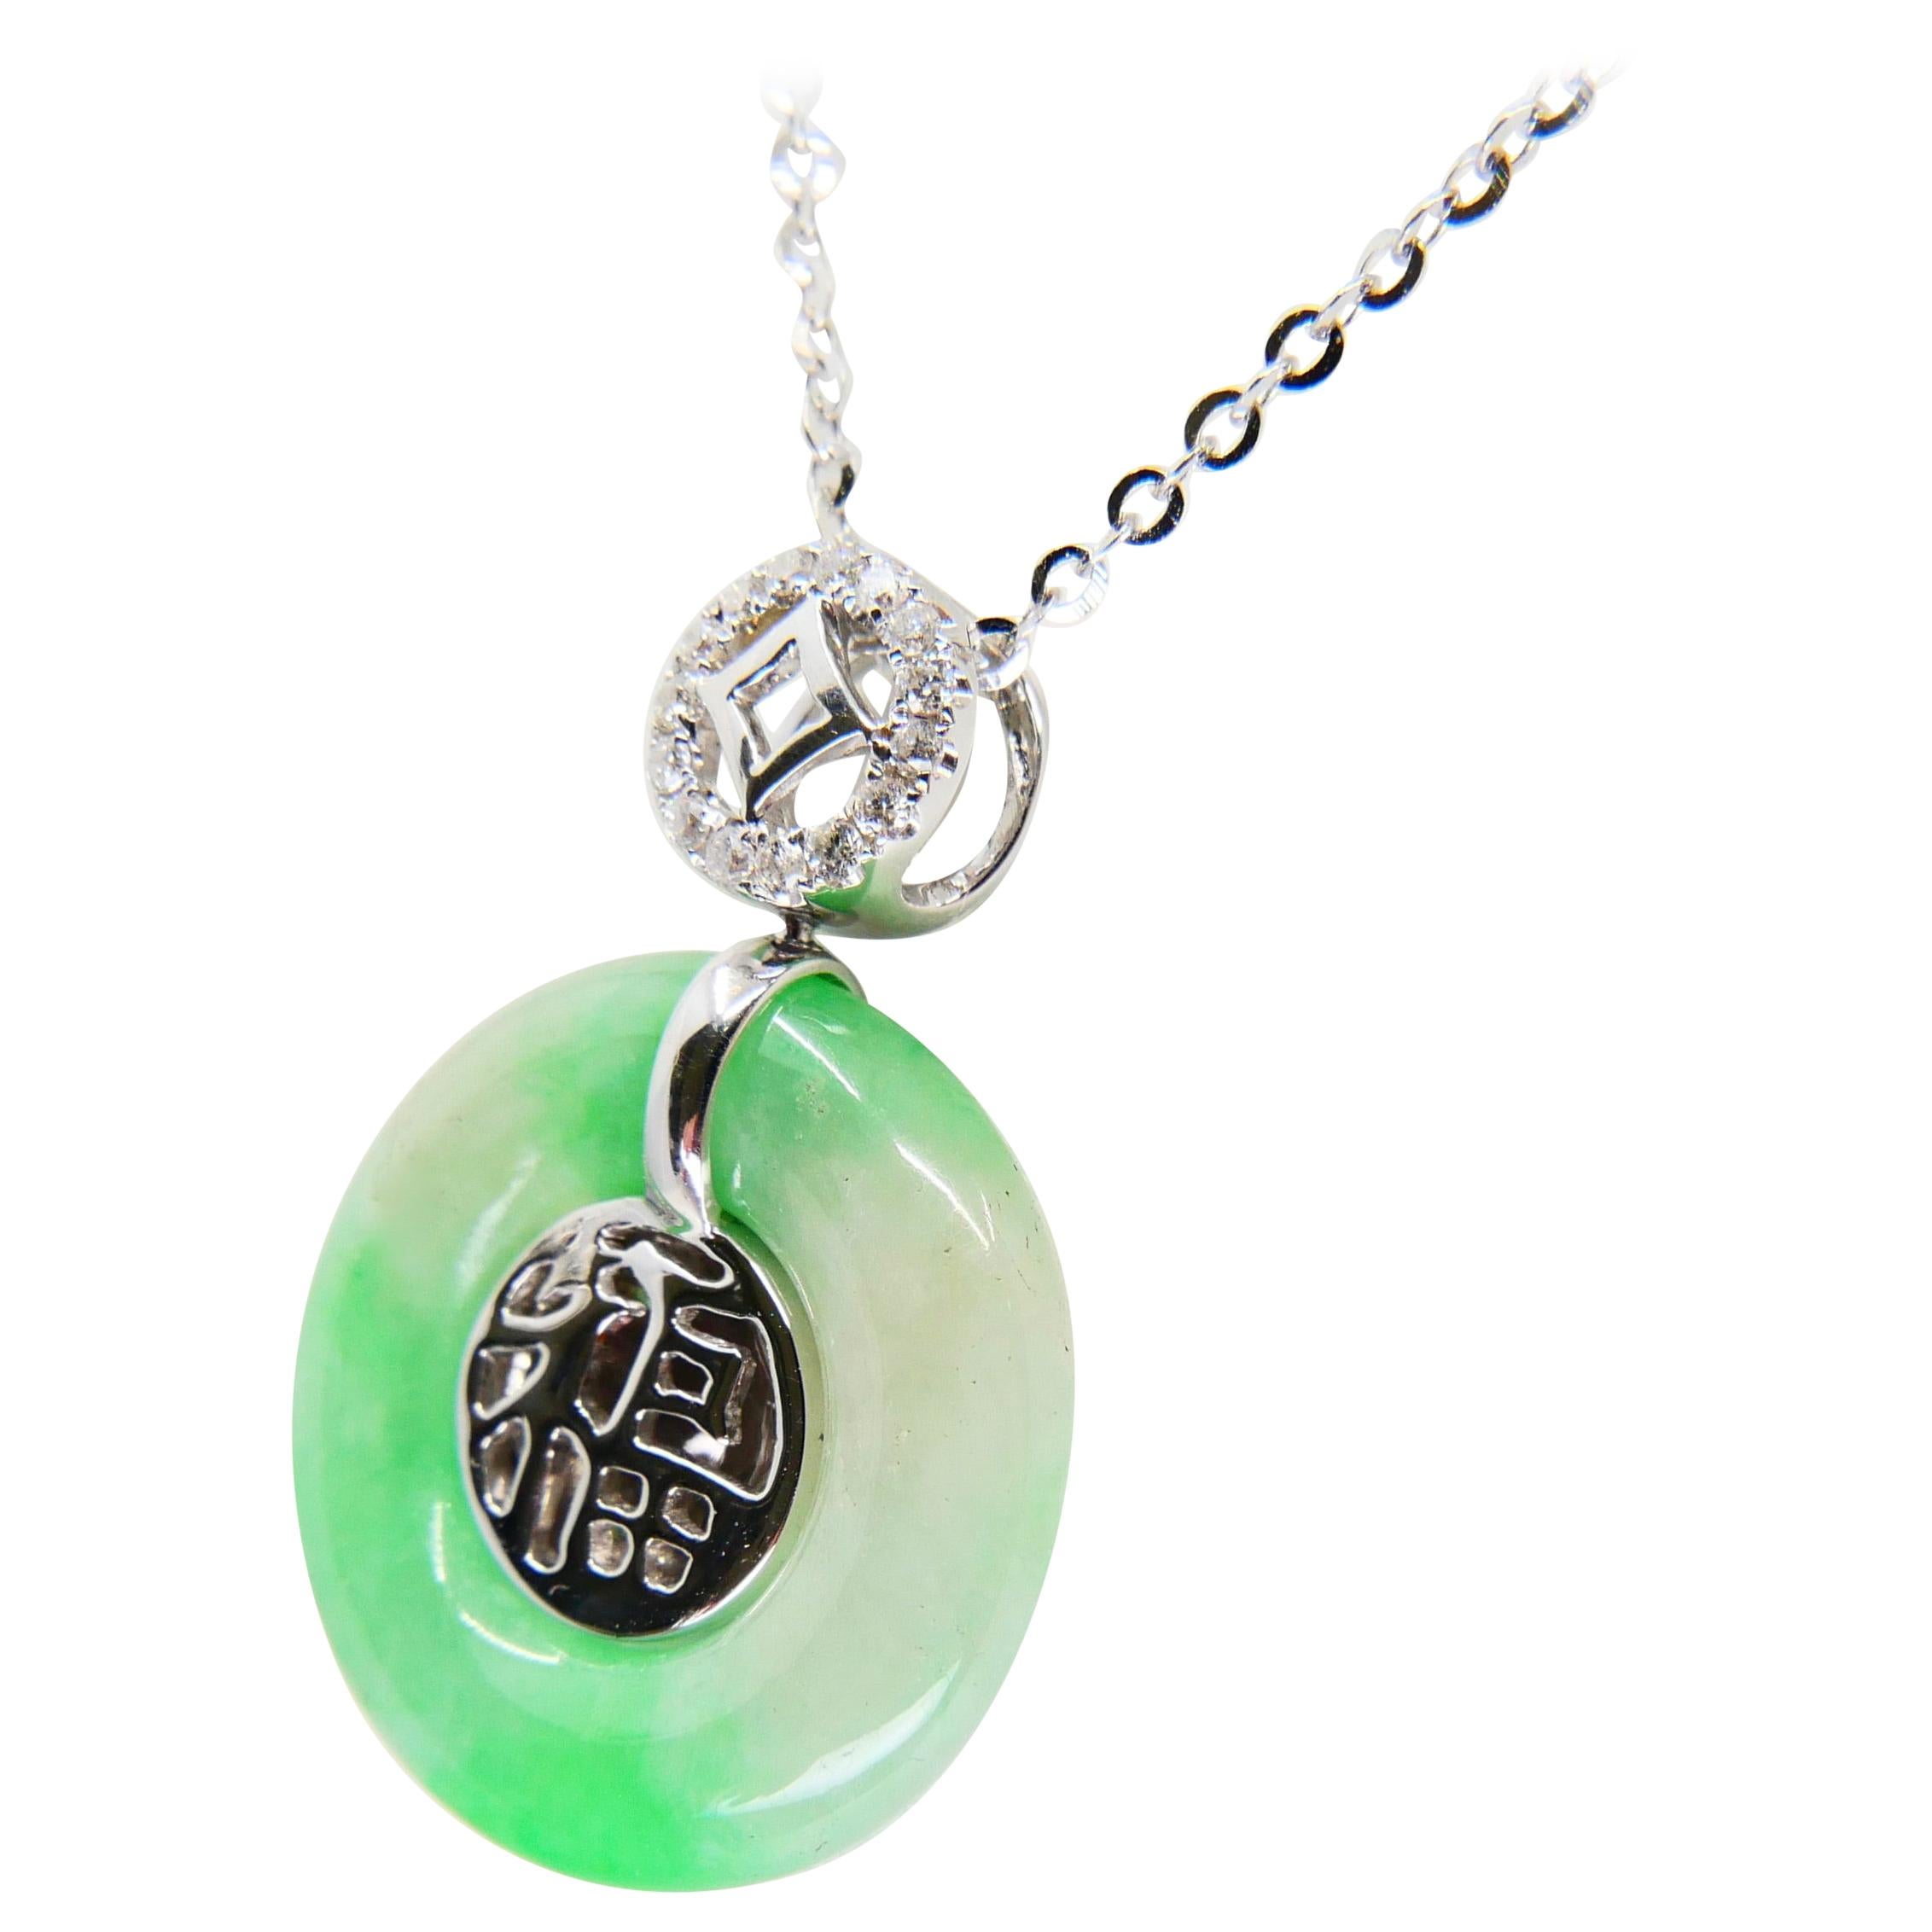 Certified Type A Jade Diamond Pendant Necklace, Apple Green Patches, Reversible For Sale